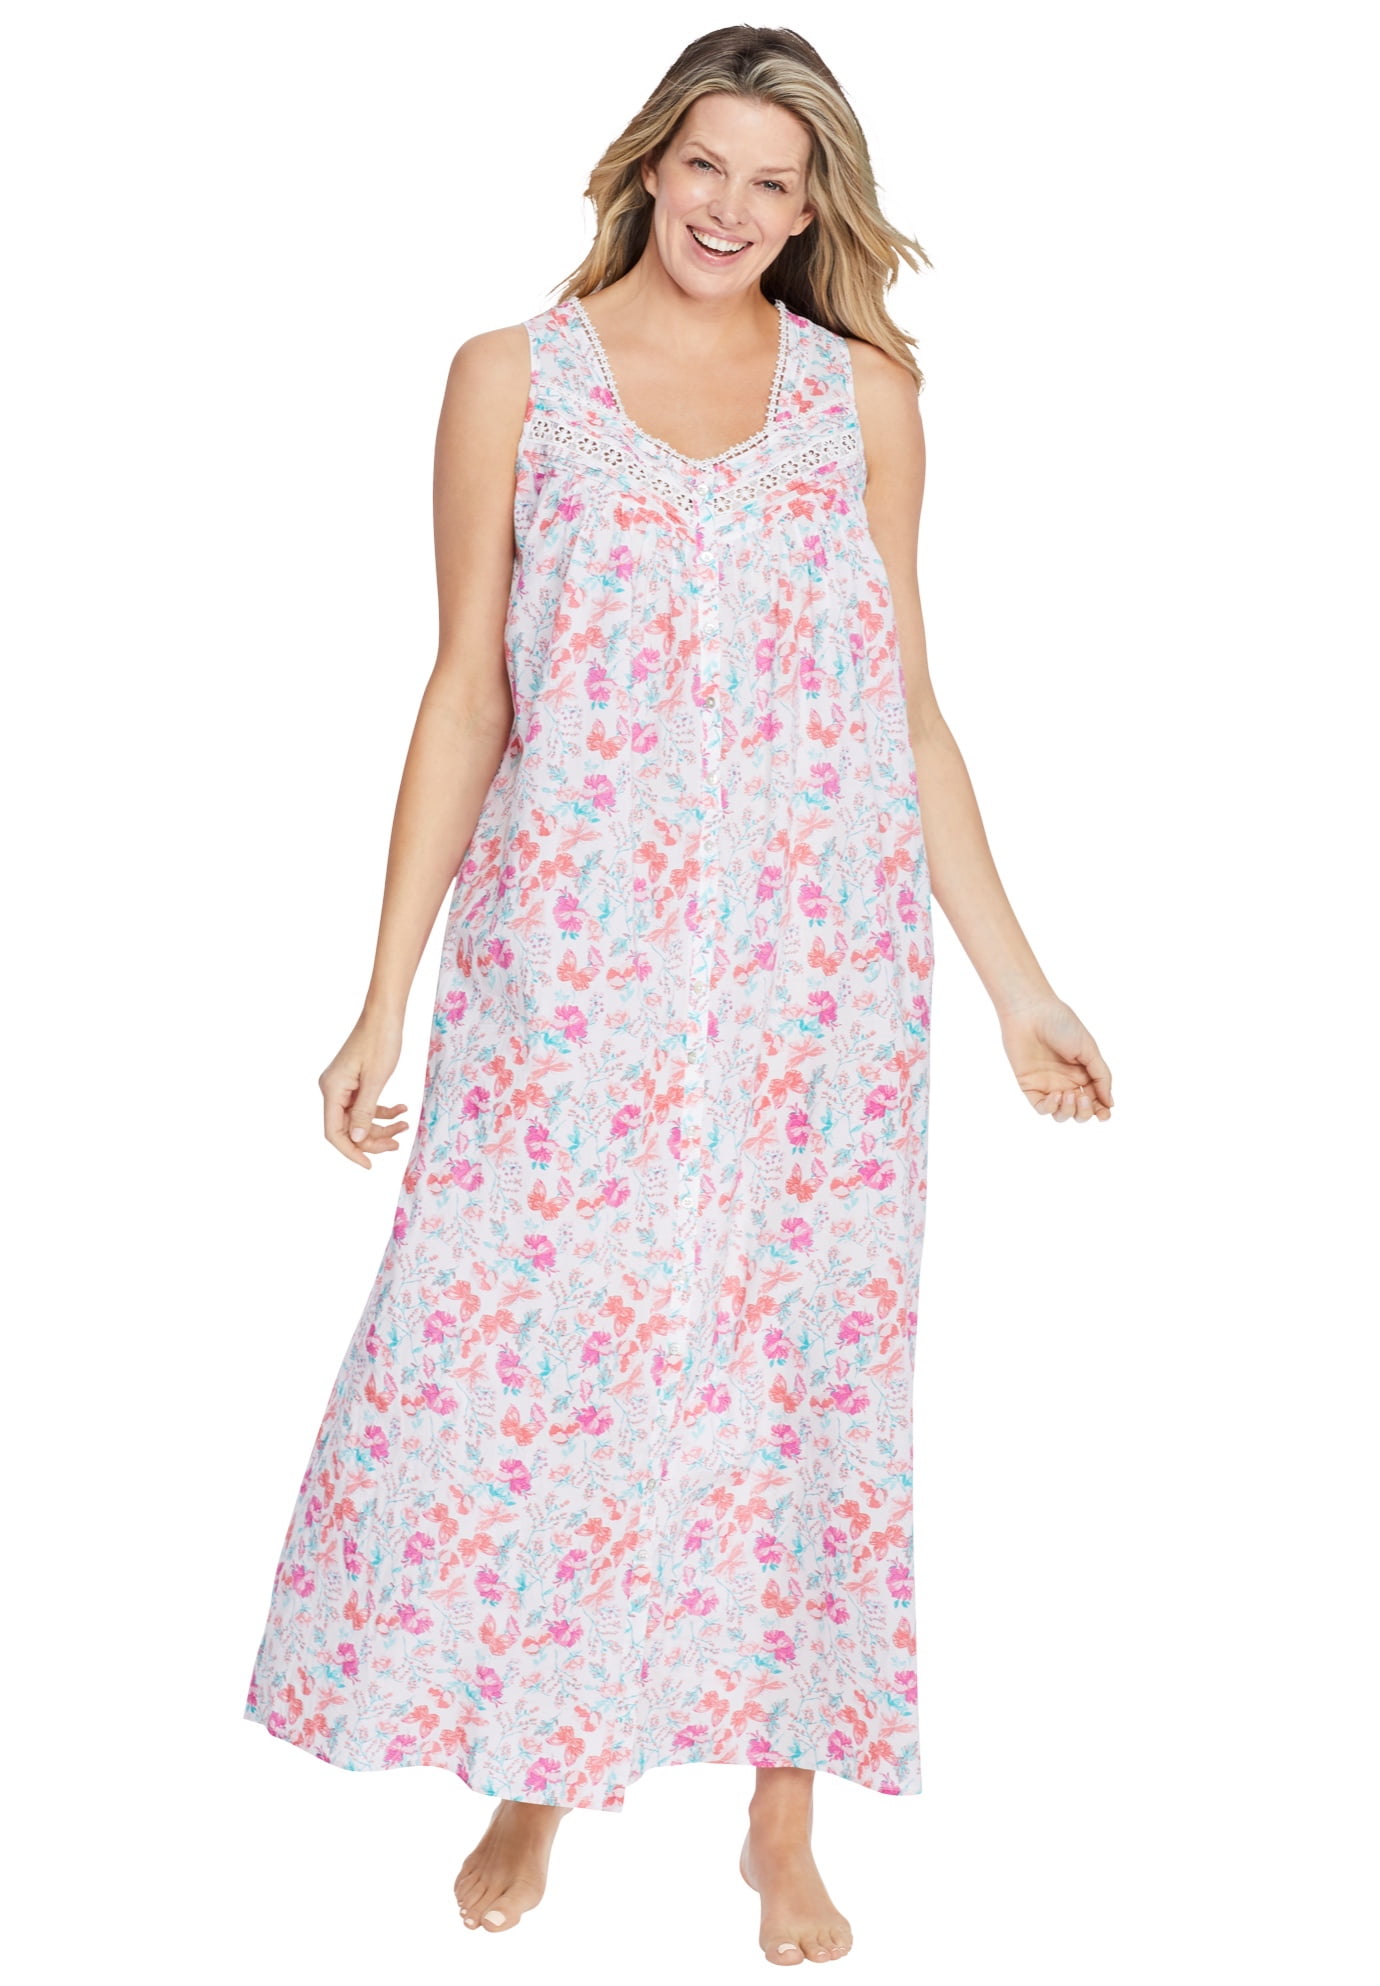 Only Necessities Women's Plus Size Long Sleeveless Floral Nightgown ...